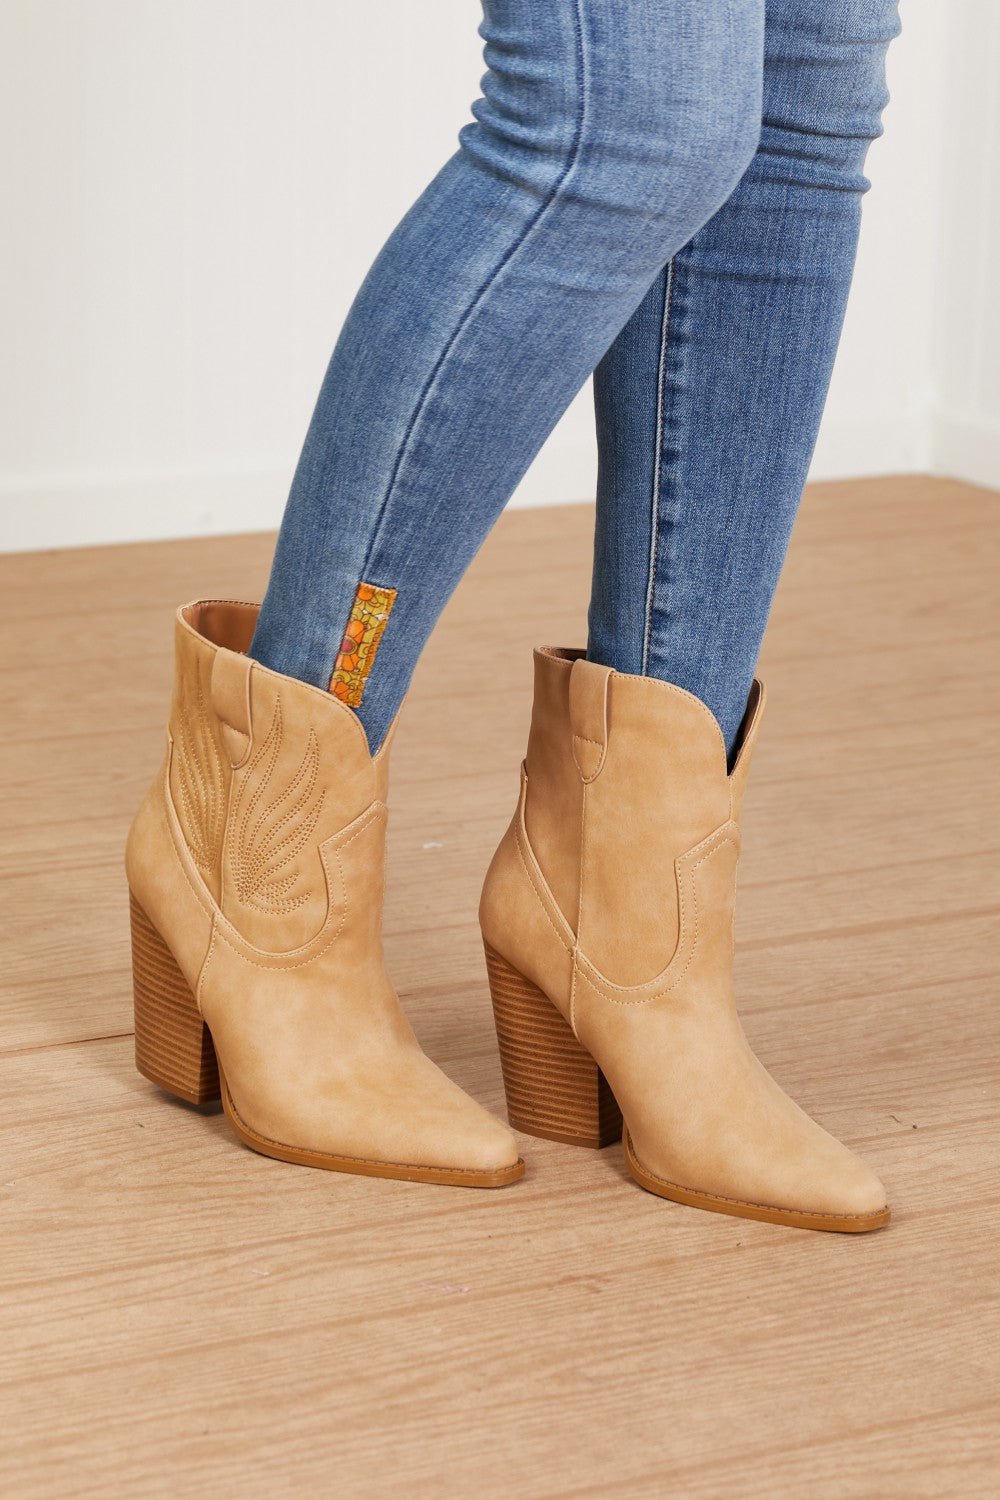 East Lion Corp Lasso My Heart Cowboy Booties - Fashion Girl Online Store